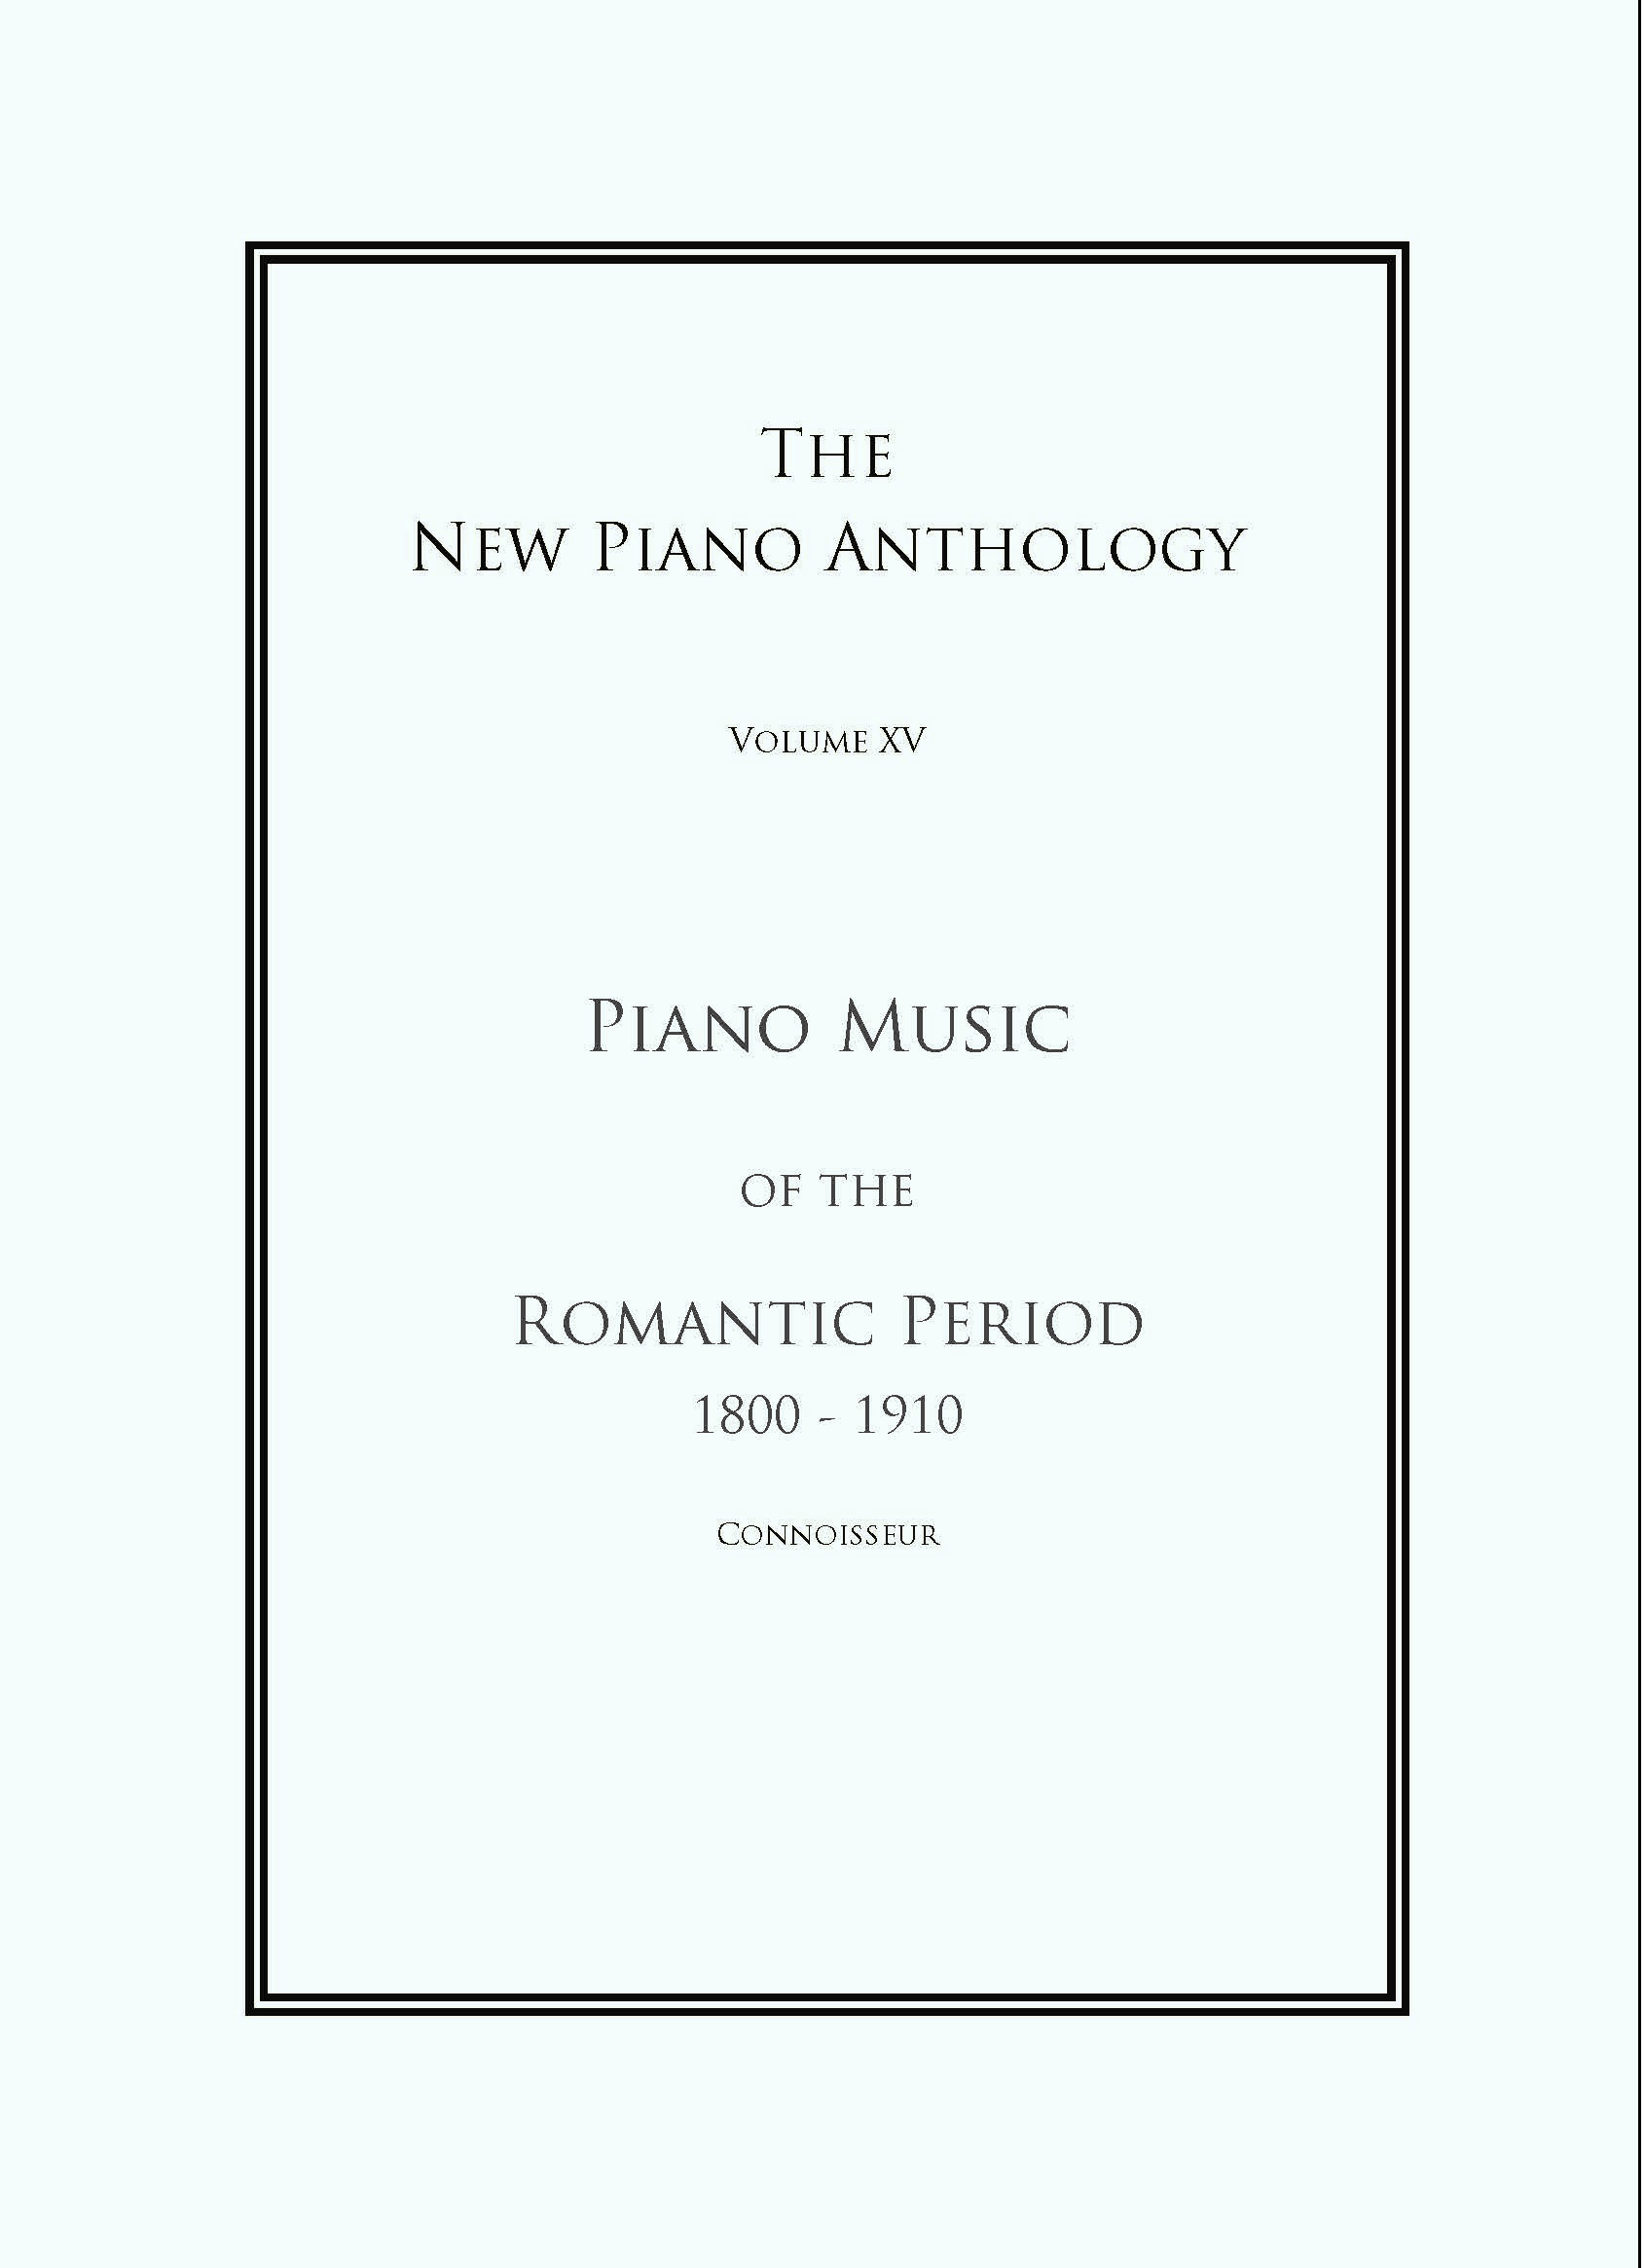 Keyboard Music of the Renaissance and Baroque (Connoisseur)